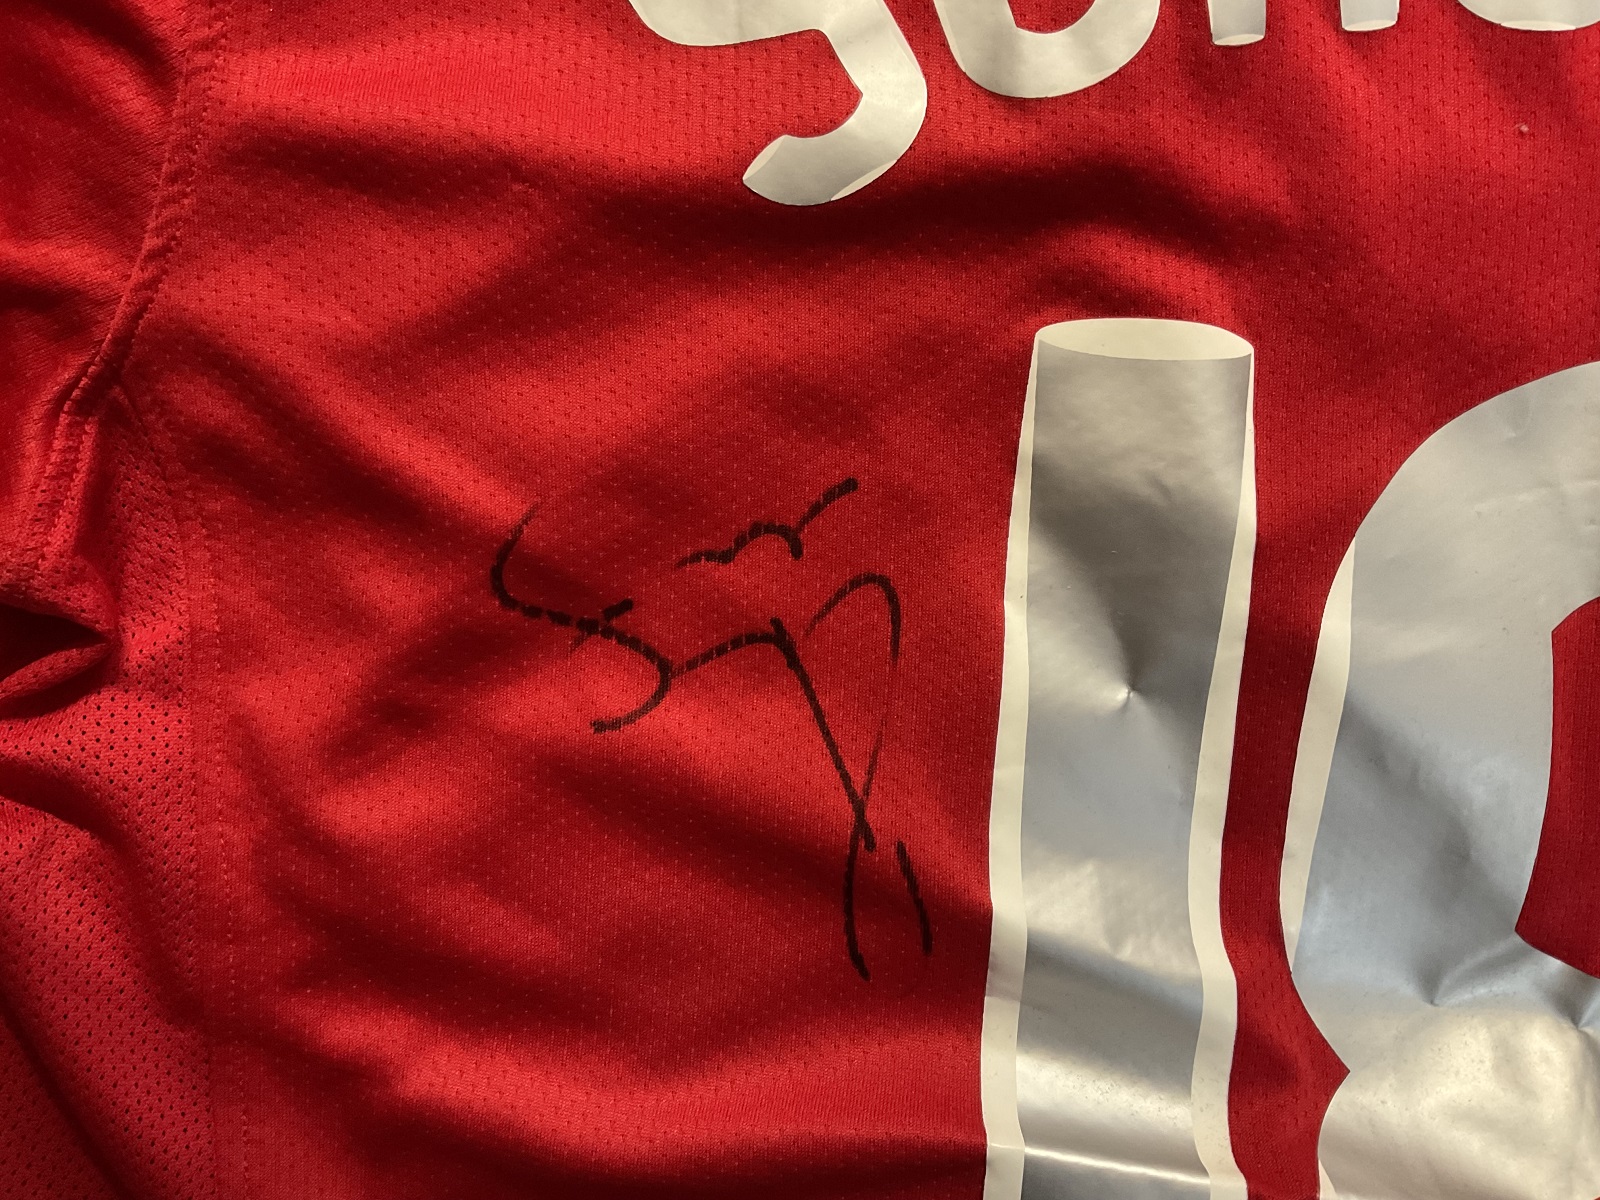 Manchester United Legend Paul Scholes Hand signed Nike Manchester United Shirt from the Final in - Image 2 of 3